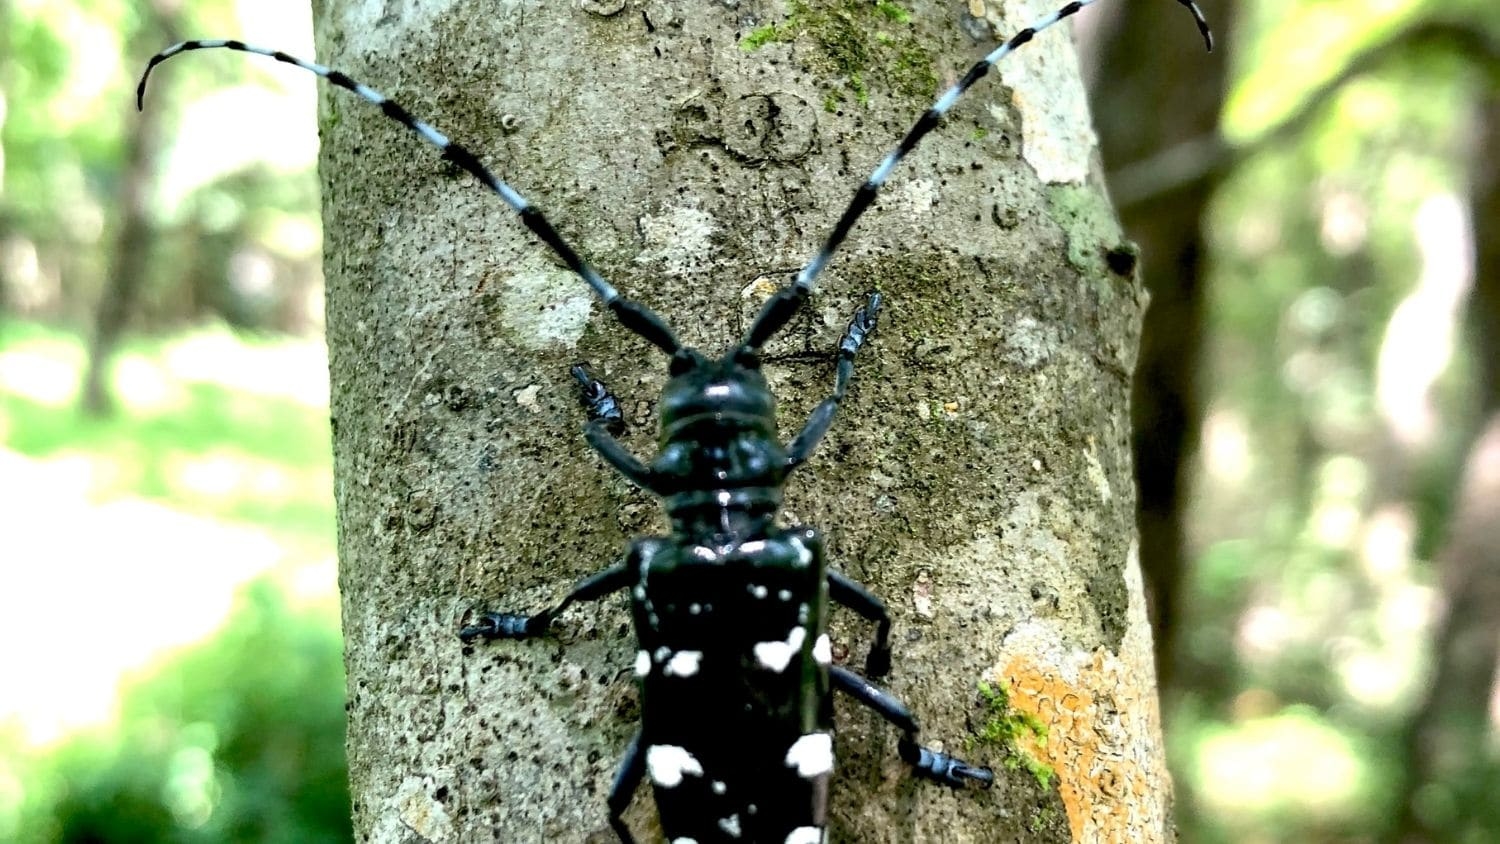 Asian longhorned beetle - Forestry Experts Want You to Watch Out for 'Poolside Pests' - College of Natural Resources News NC State University